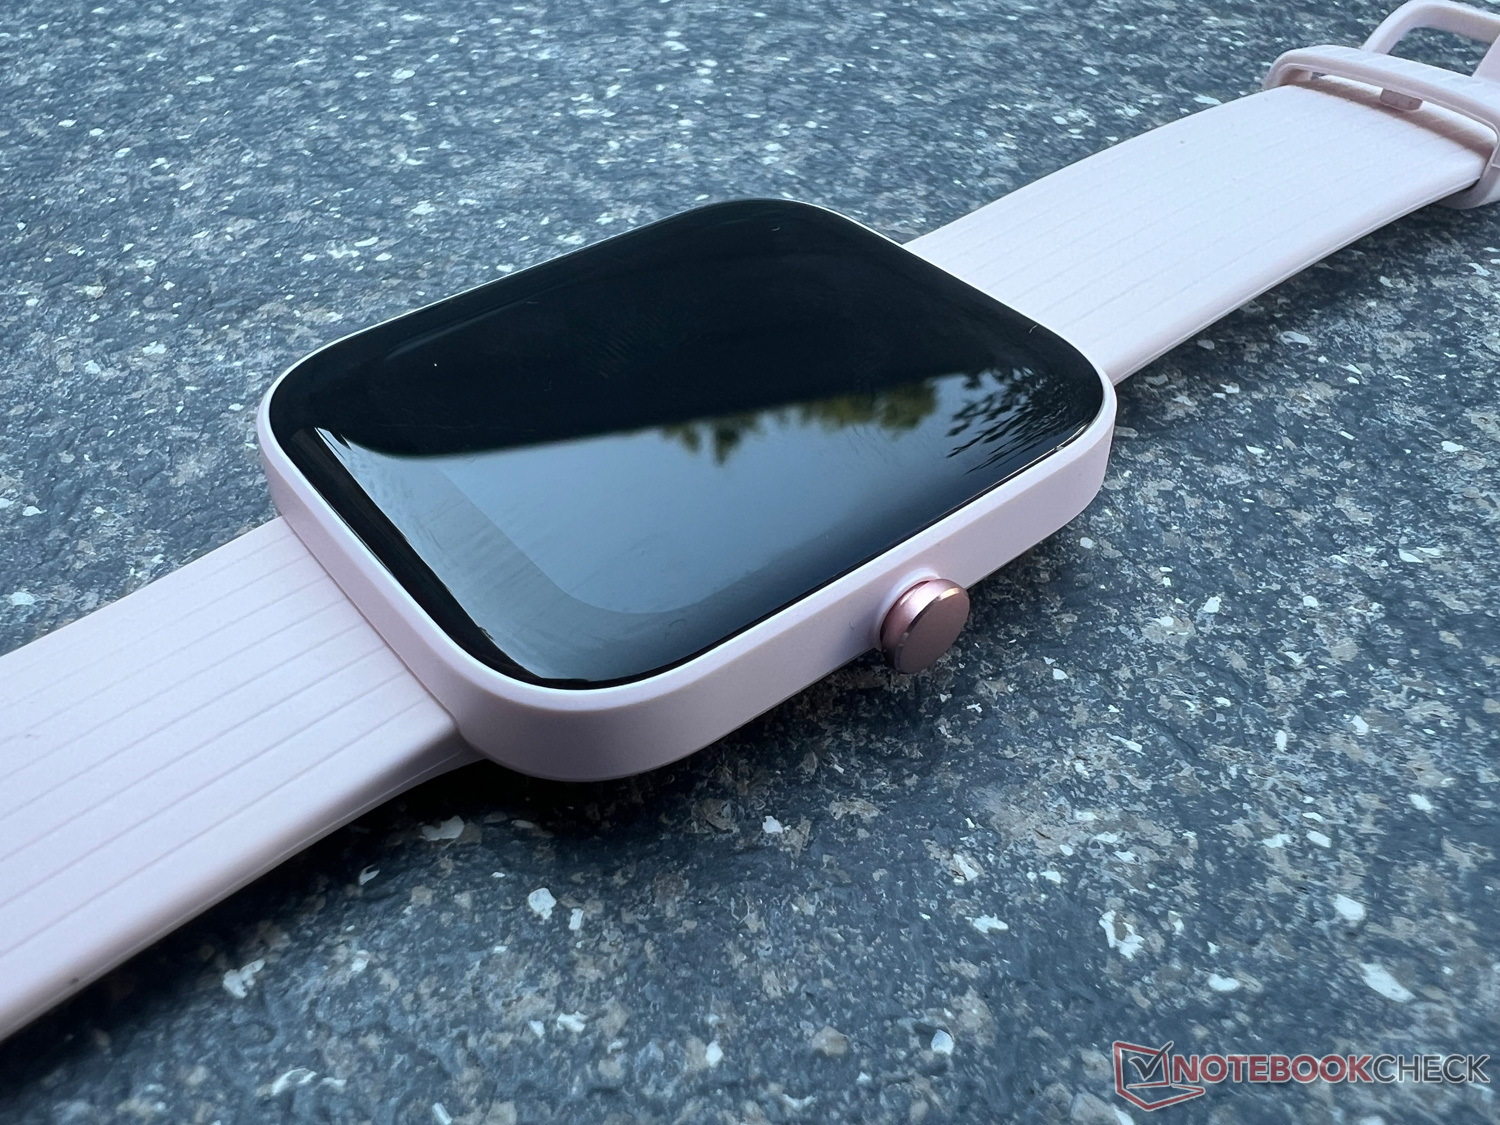 Amazfit Bip 3 Pro Review: Upgraded Smartwatch With Powerful Battery -  Gizbot Reviews